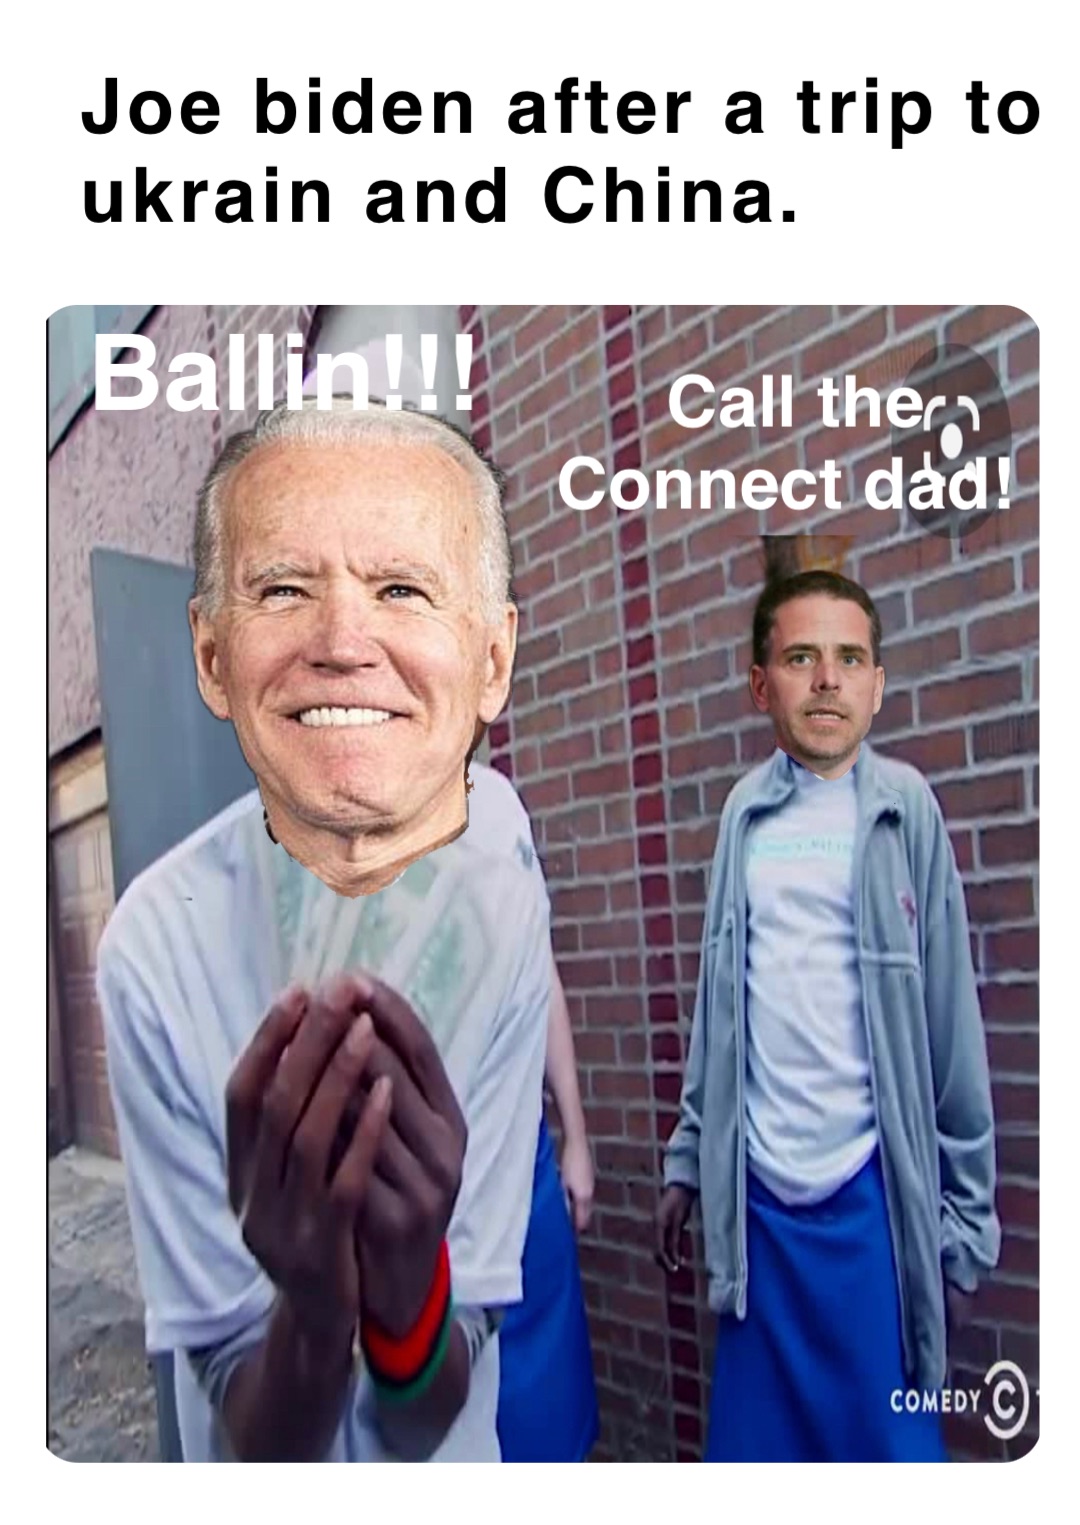 Joe biden after a trip to ukrain and China. Ballin!!! Call the 
Connect dad!